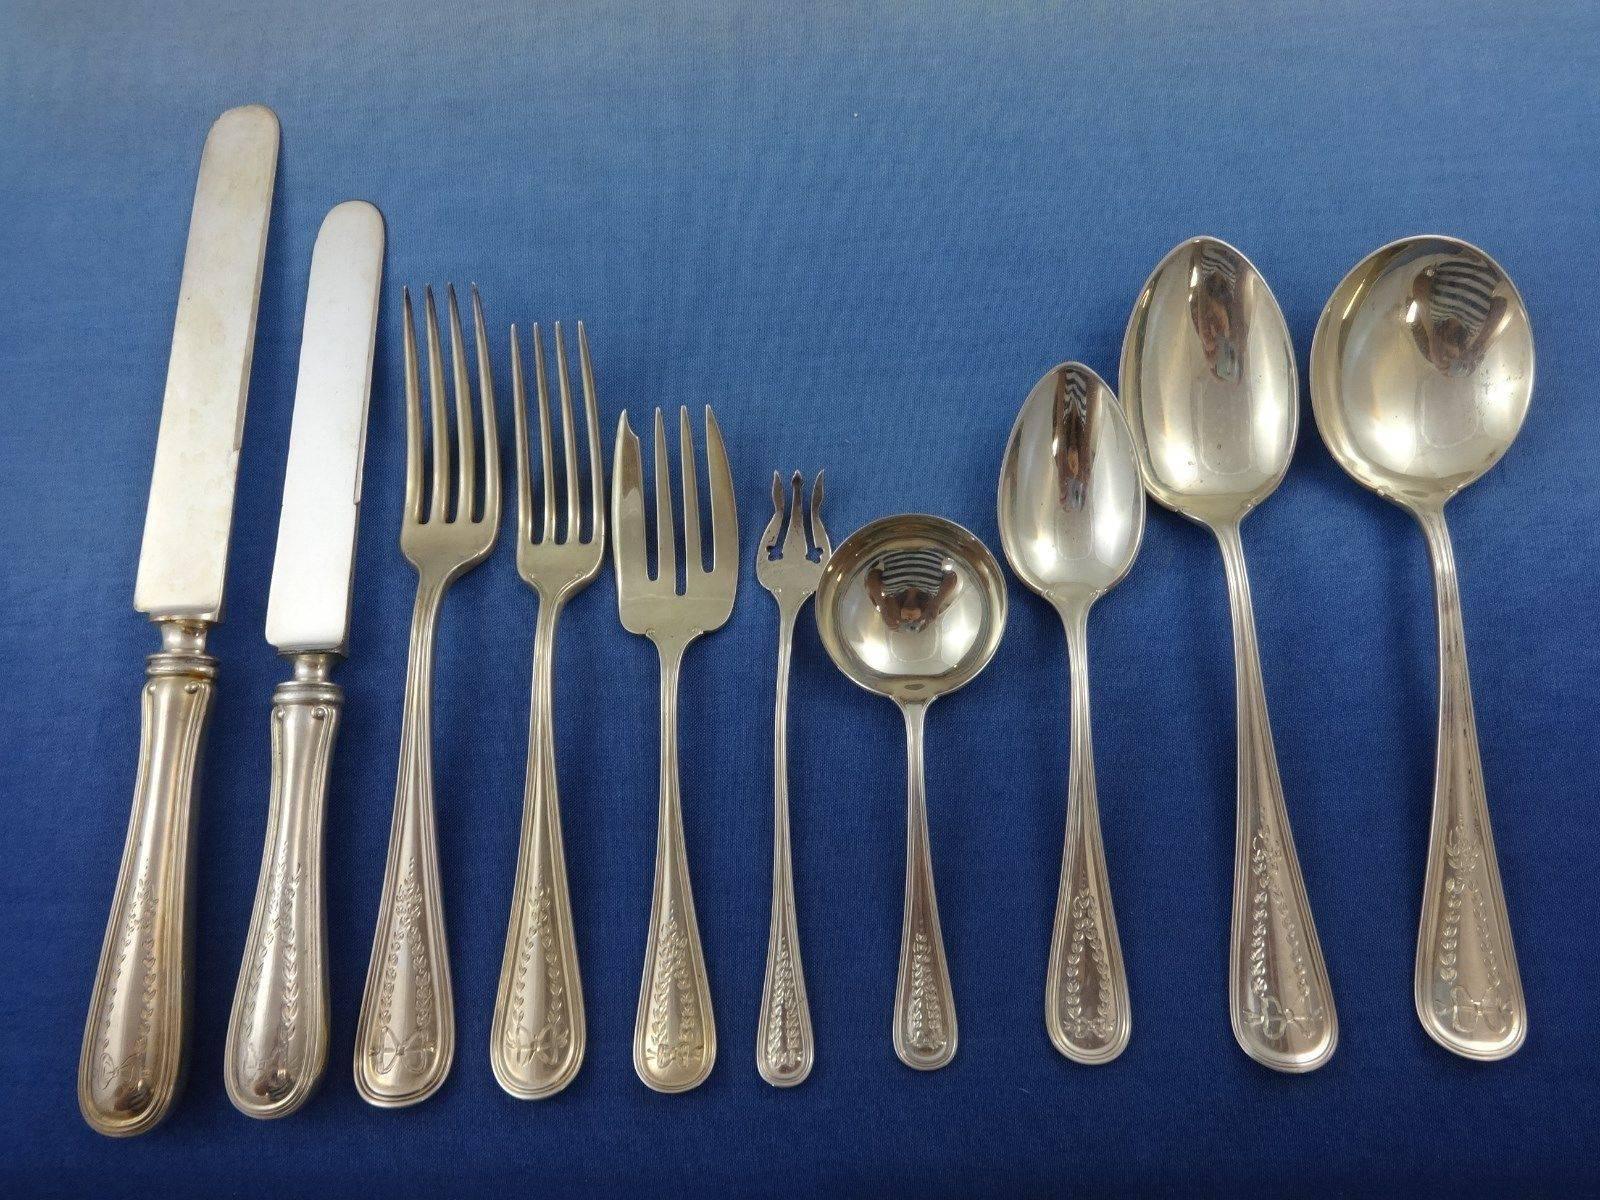 Exceptional Commonwealth Engraved by Watson sterling silver dinner flatware set of 132 pieces. This pattern features an lovely engraved design of a bow and wreath. This set includes:

12 dinner size knives, 9 7/8